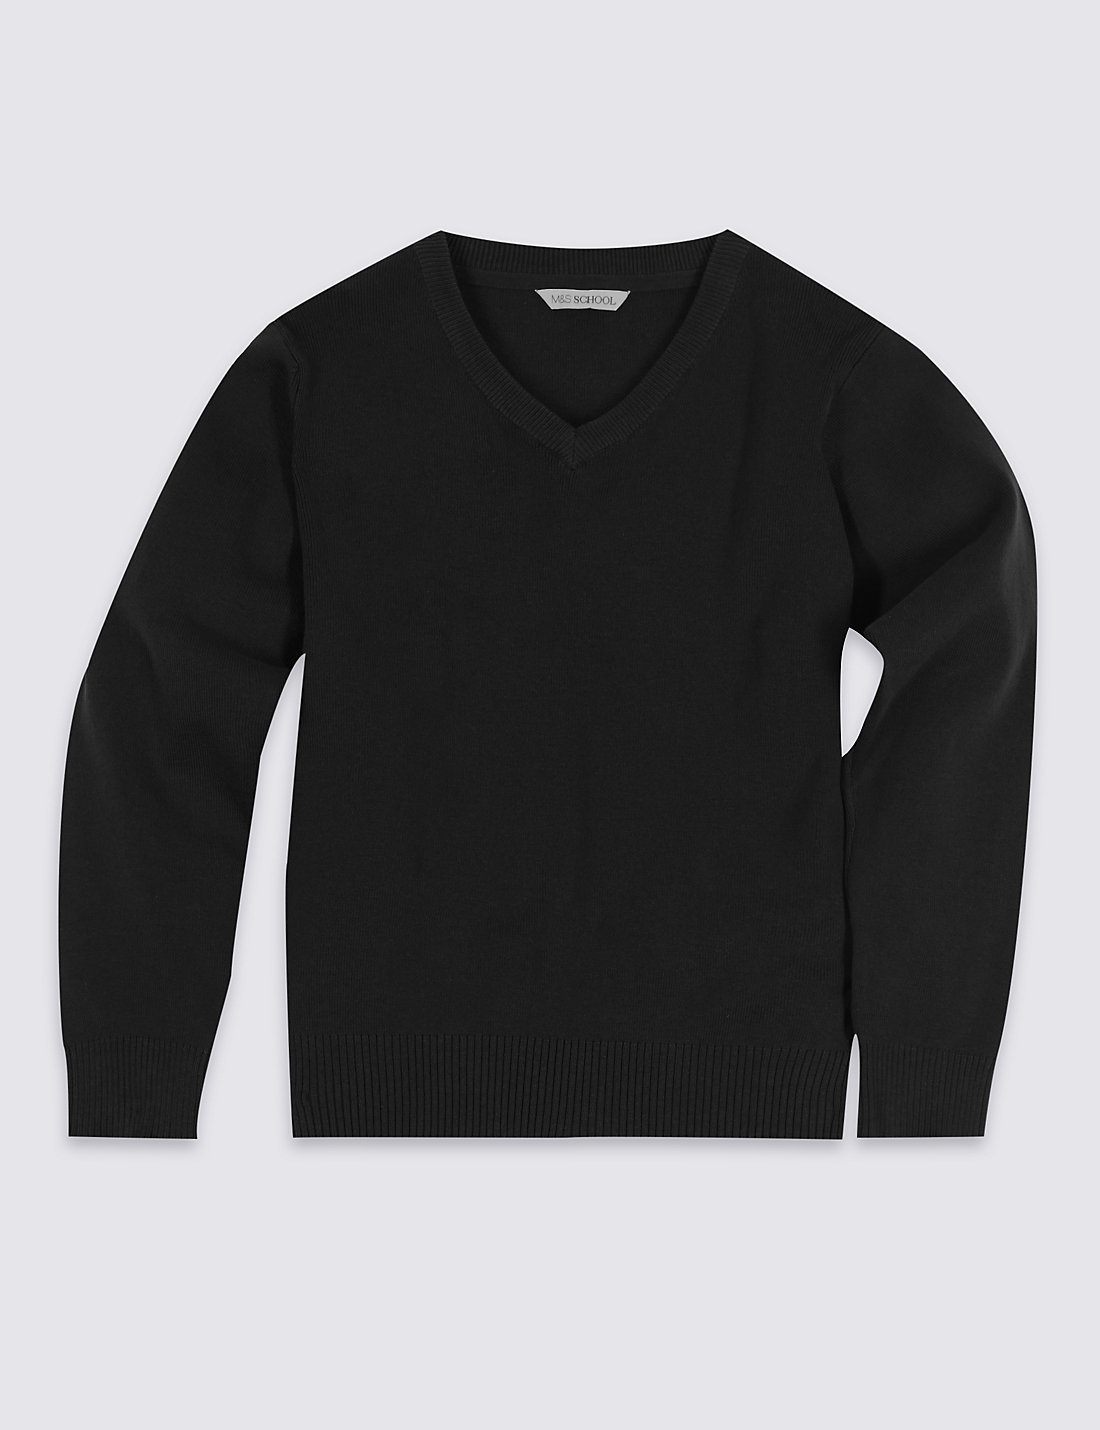 Get a trendy look with black jumper